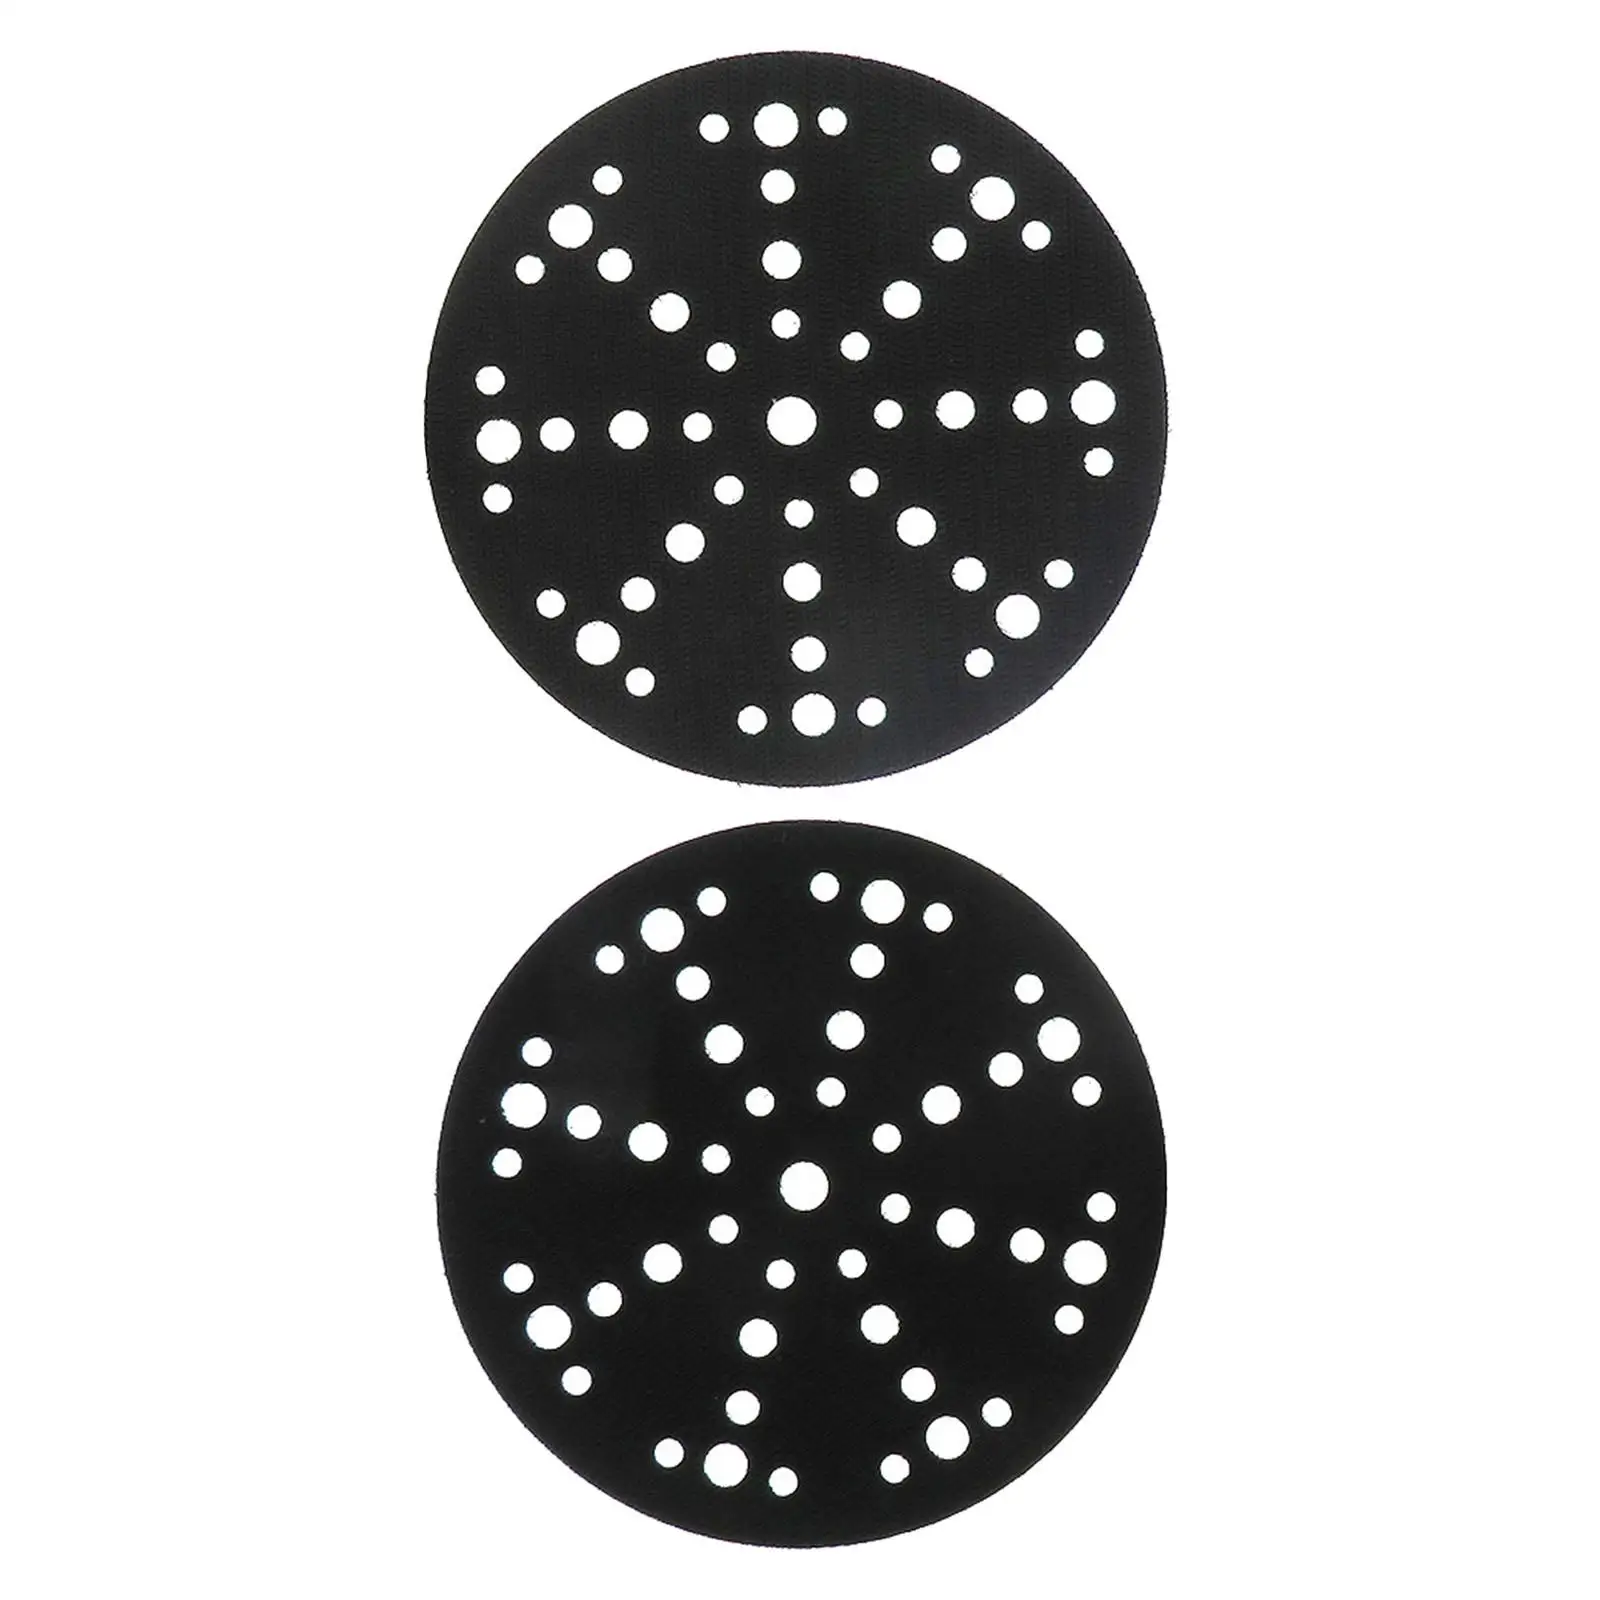 

2 Pieces Sandpaper Sanding Pads 6 inch 48 Holes Backing Grinding Polishing Pad Disc for Carving